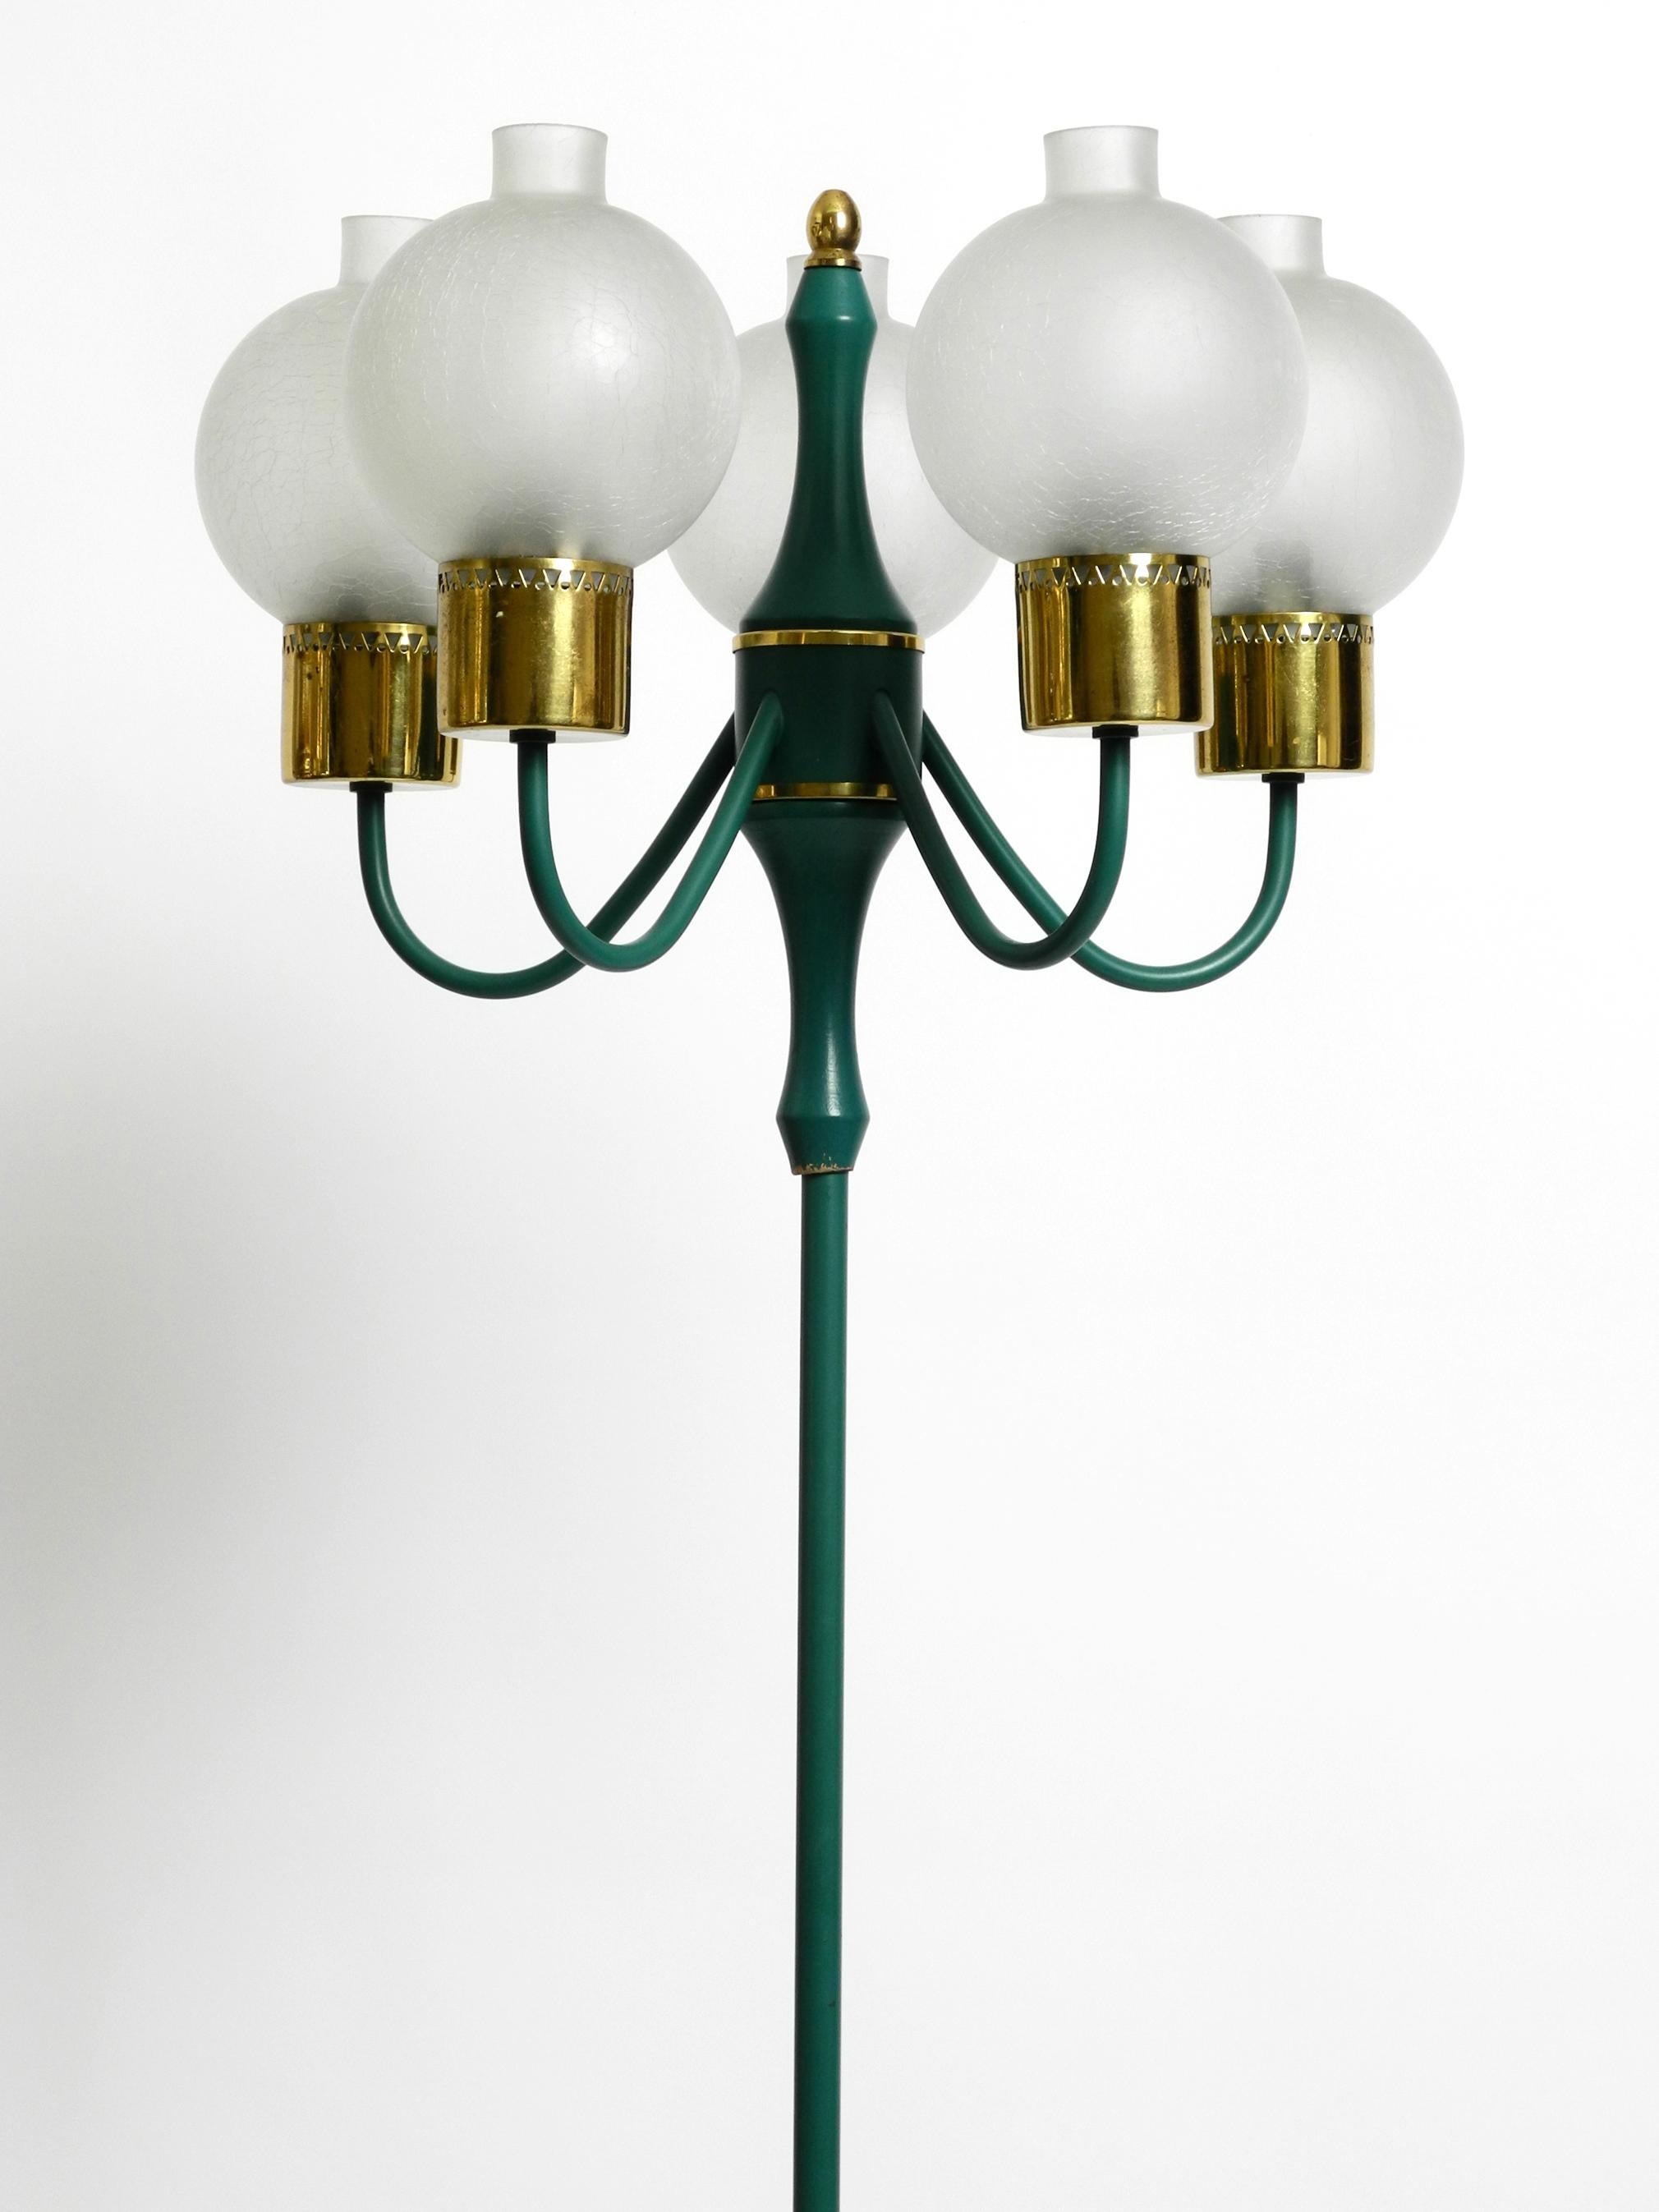 German Original 1960s Kaiser Metal Floor Lamp with 5 Ice Glass Shades in Forest Green